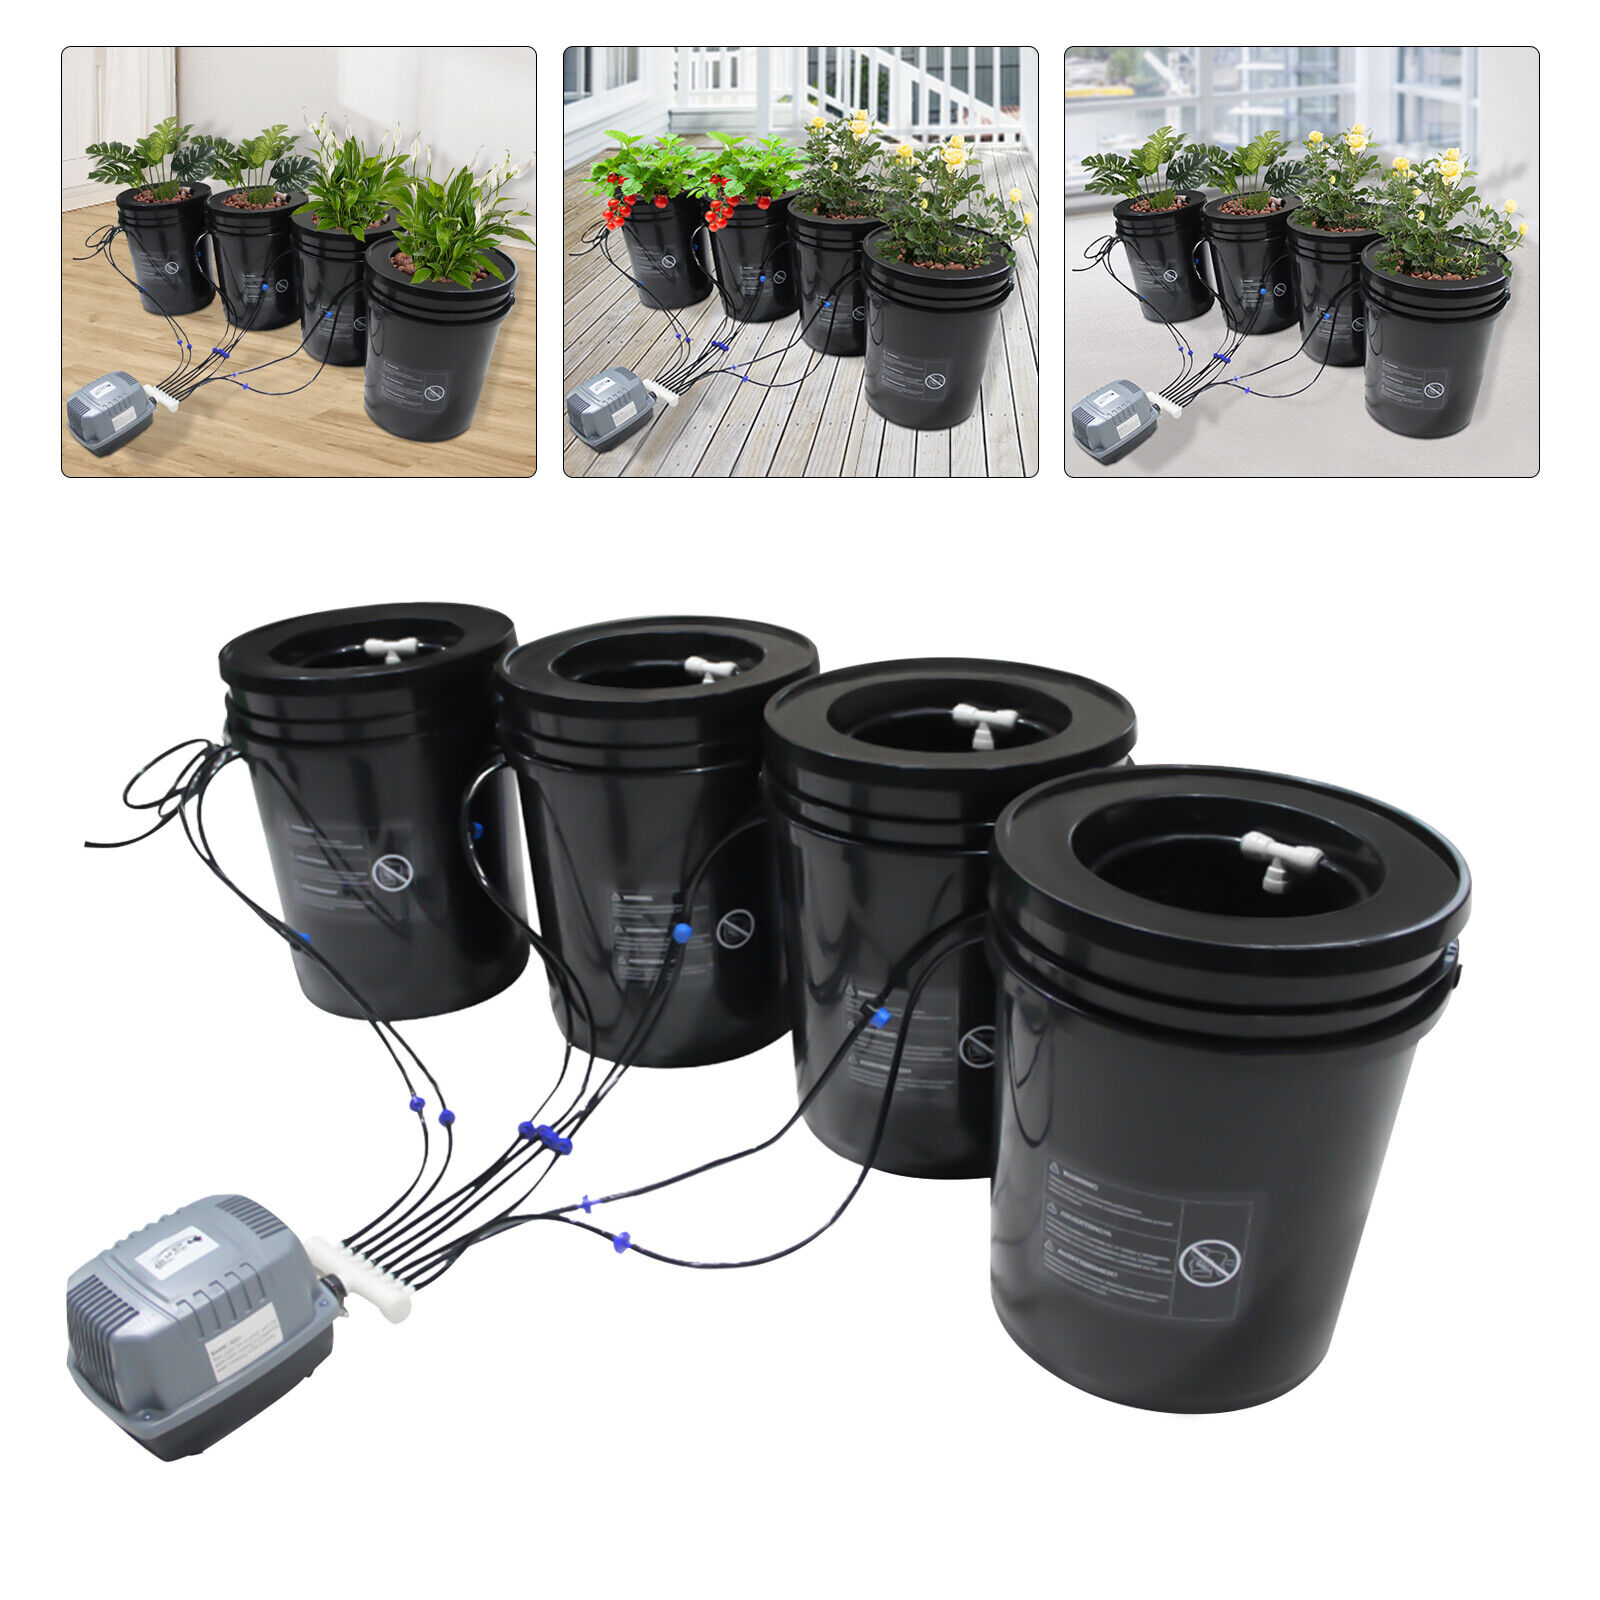 4 Bucket 5 Gal DWC Hydroponic Growing System w/ Top Drip Kit with Air Pump 15W